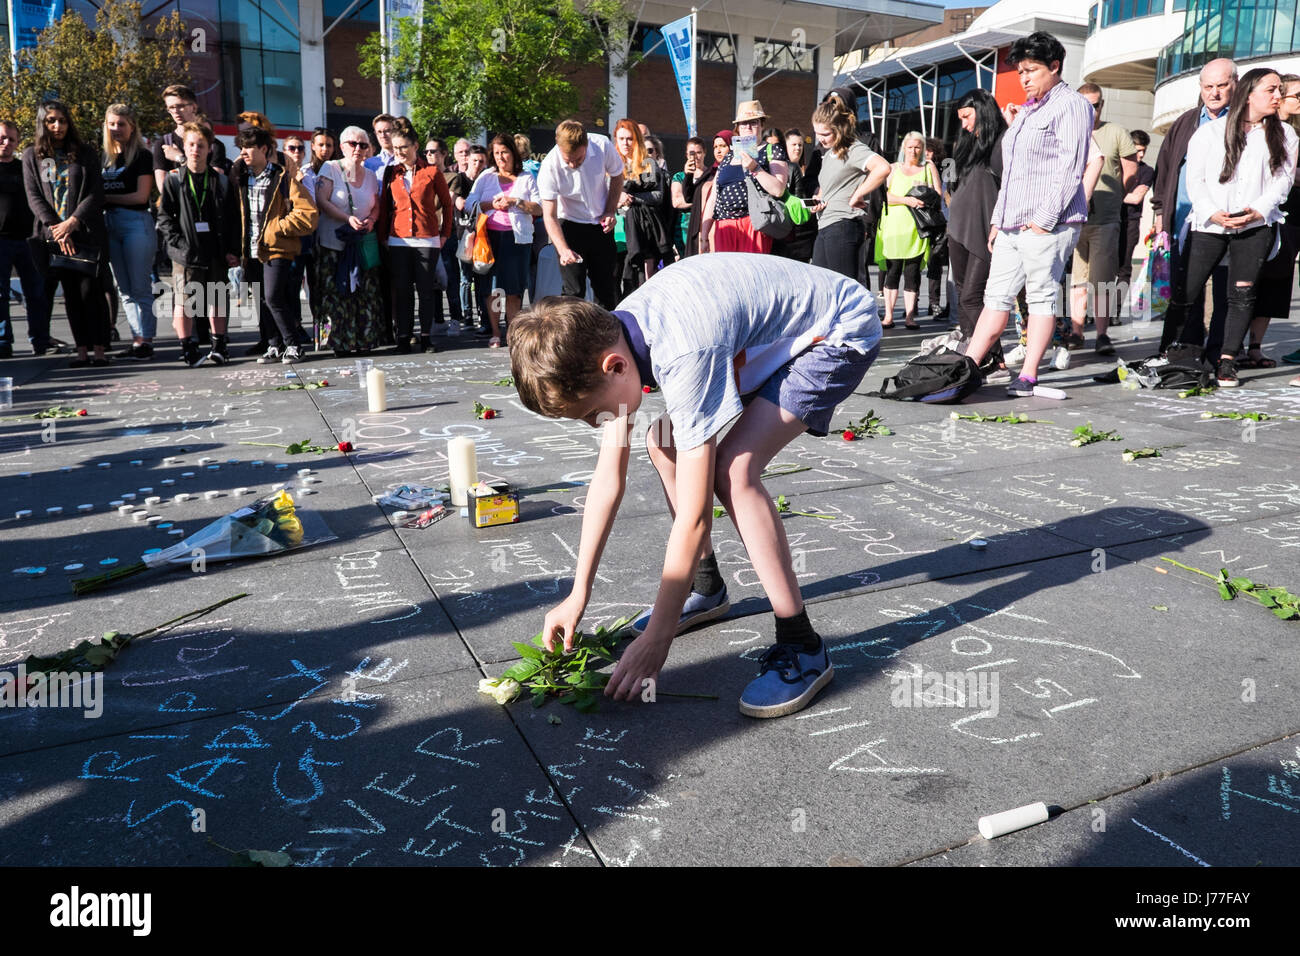 Liverpool, UK. 23rd May, 2017. Around 150 people attended a vigil in Liverpool on Tuesday March 23, 2017 to remember the victims of the terrorist attack which took place at the Manchester Arena following a concert last night in which 22 people where killed. Credit: Christopher Middleton/Alamy Live News Stock Photo